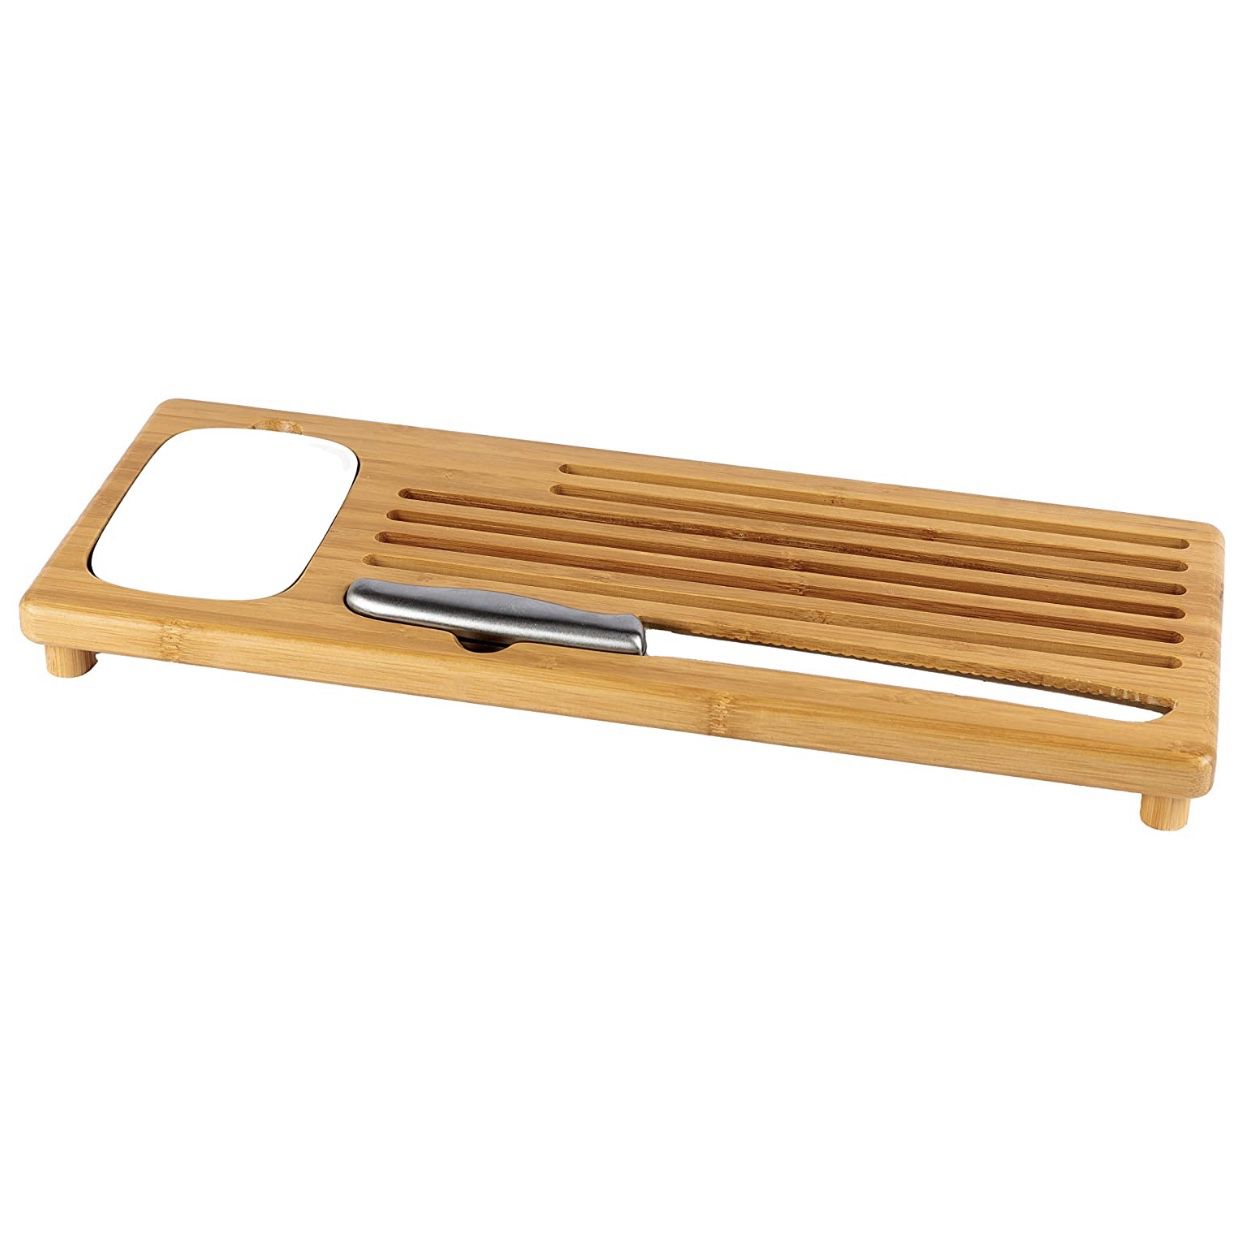 Bamboo cutting bread board with bread crumb catcher, ceramic Dipping Dish, Olive Oil Dish, large BREAD knife to cut homemade bread, loaf cake/Full br